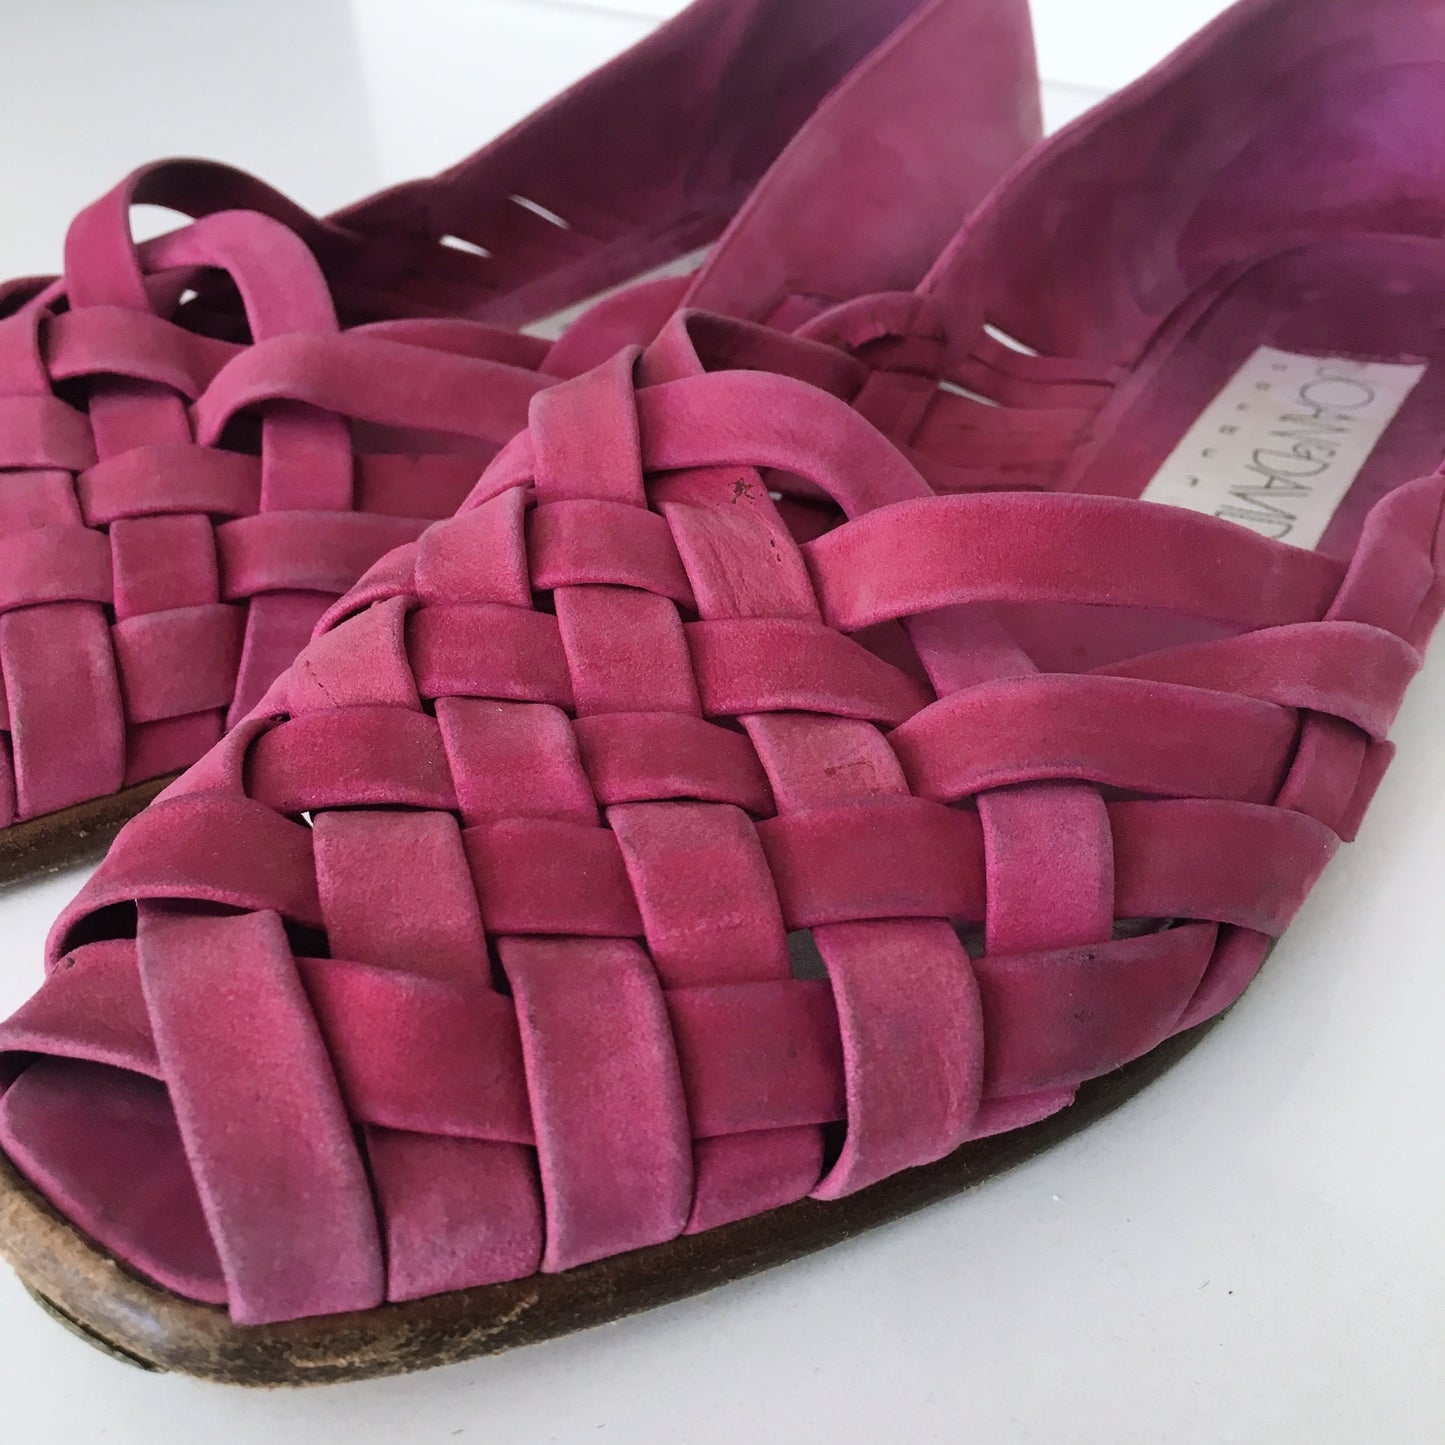 Vintage Joan &amp; David Couture Leather Flats - size 9.5